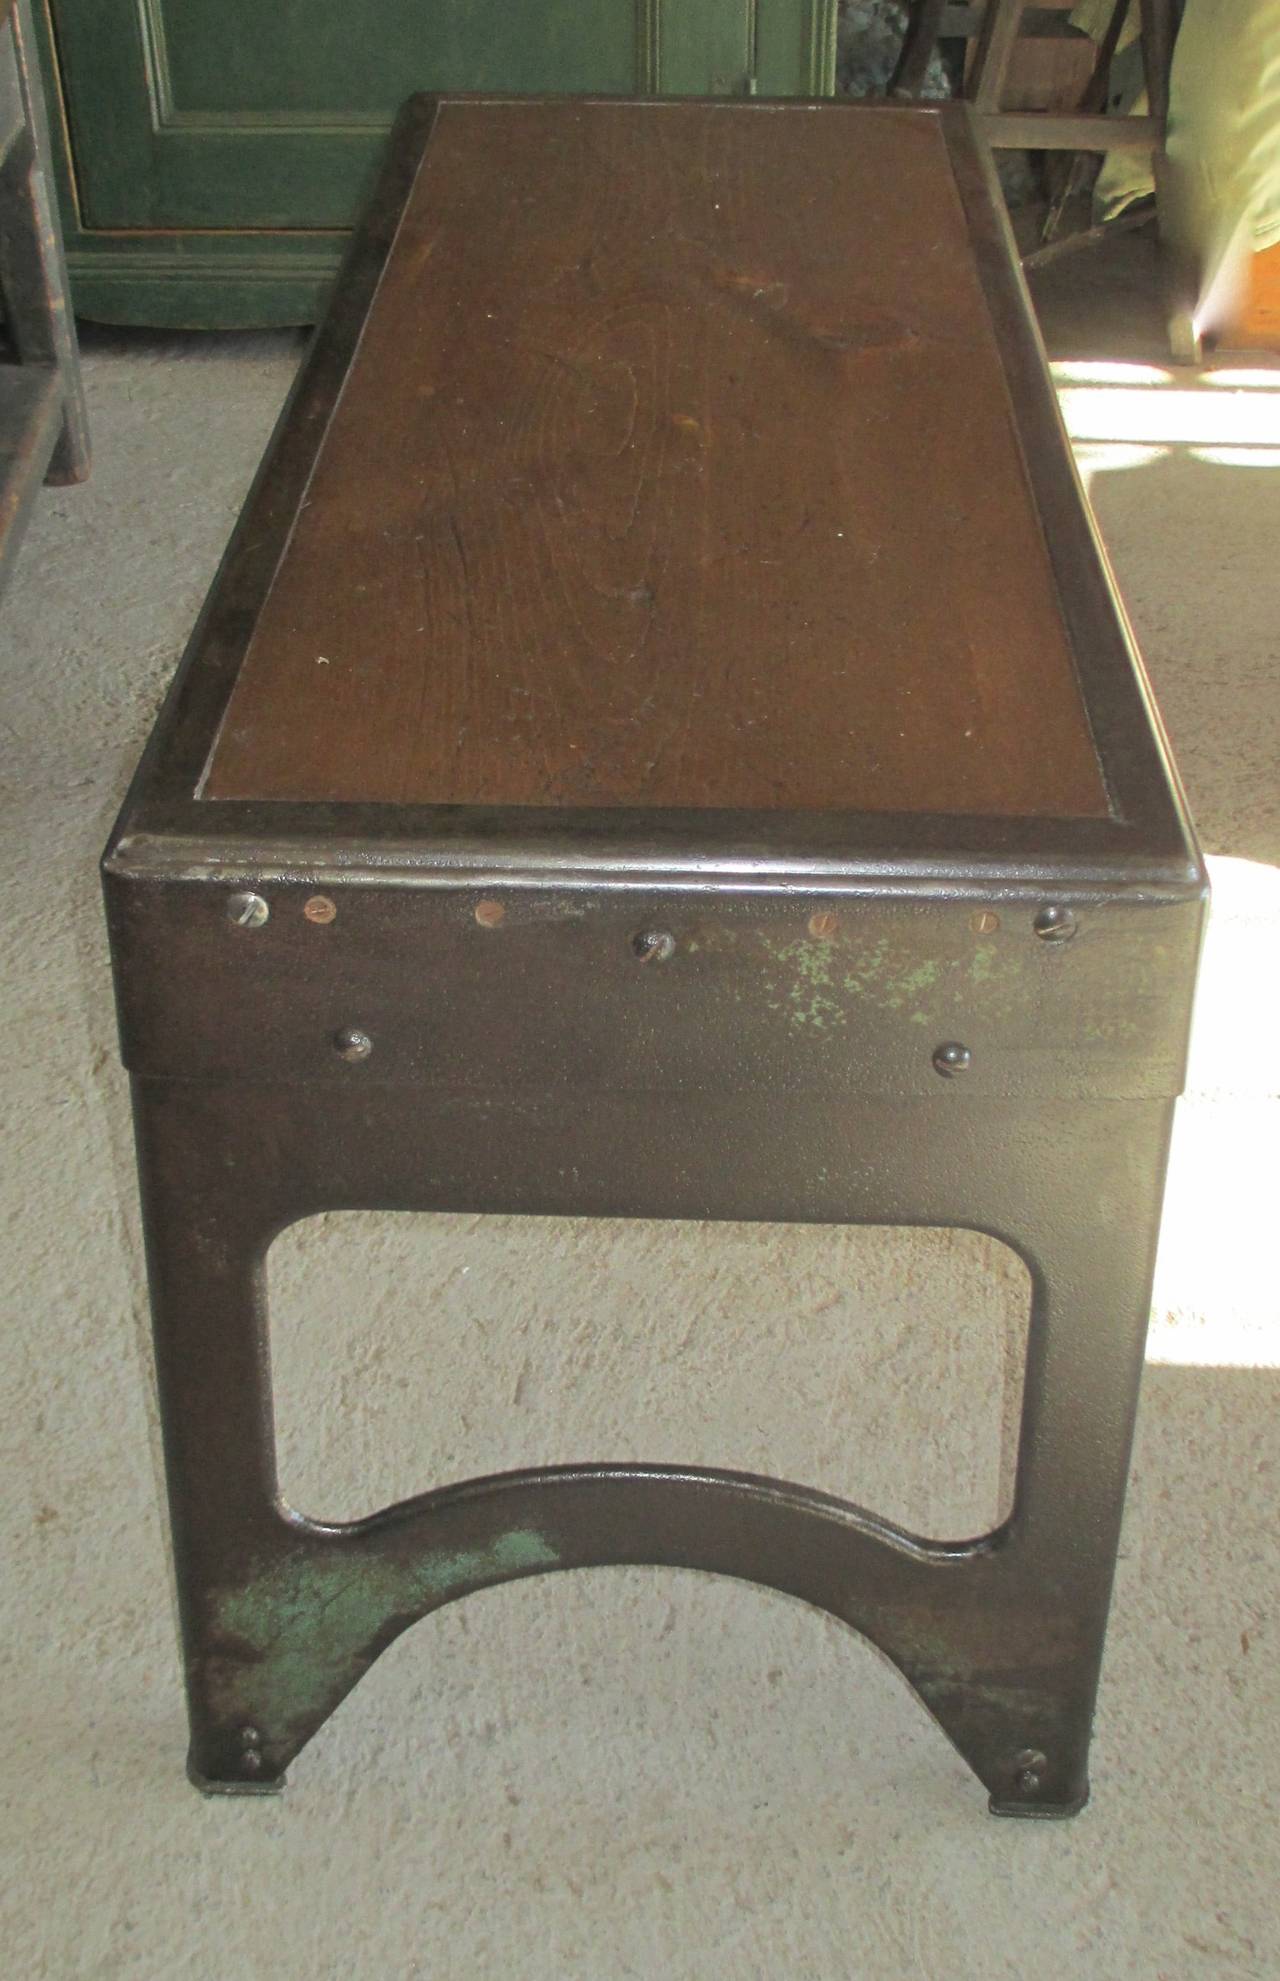 A small workshop bench. A metal green patina base with a wooden top.